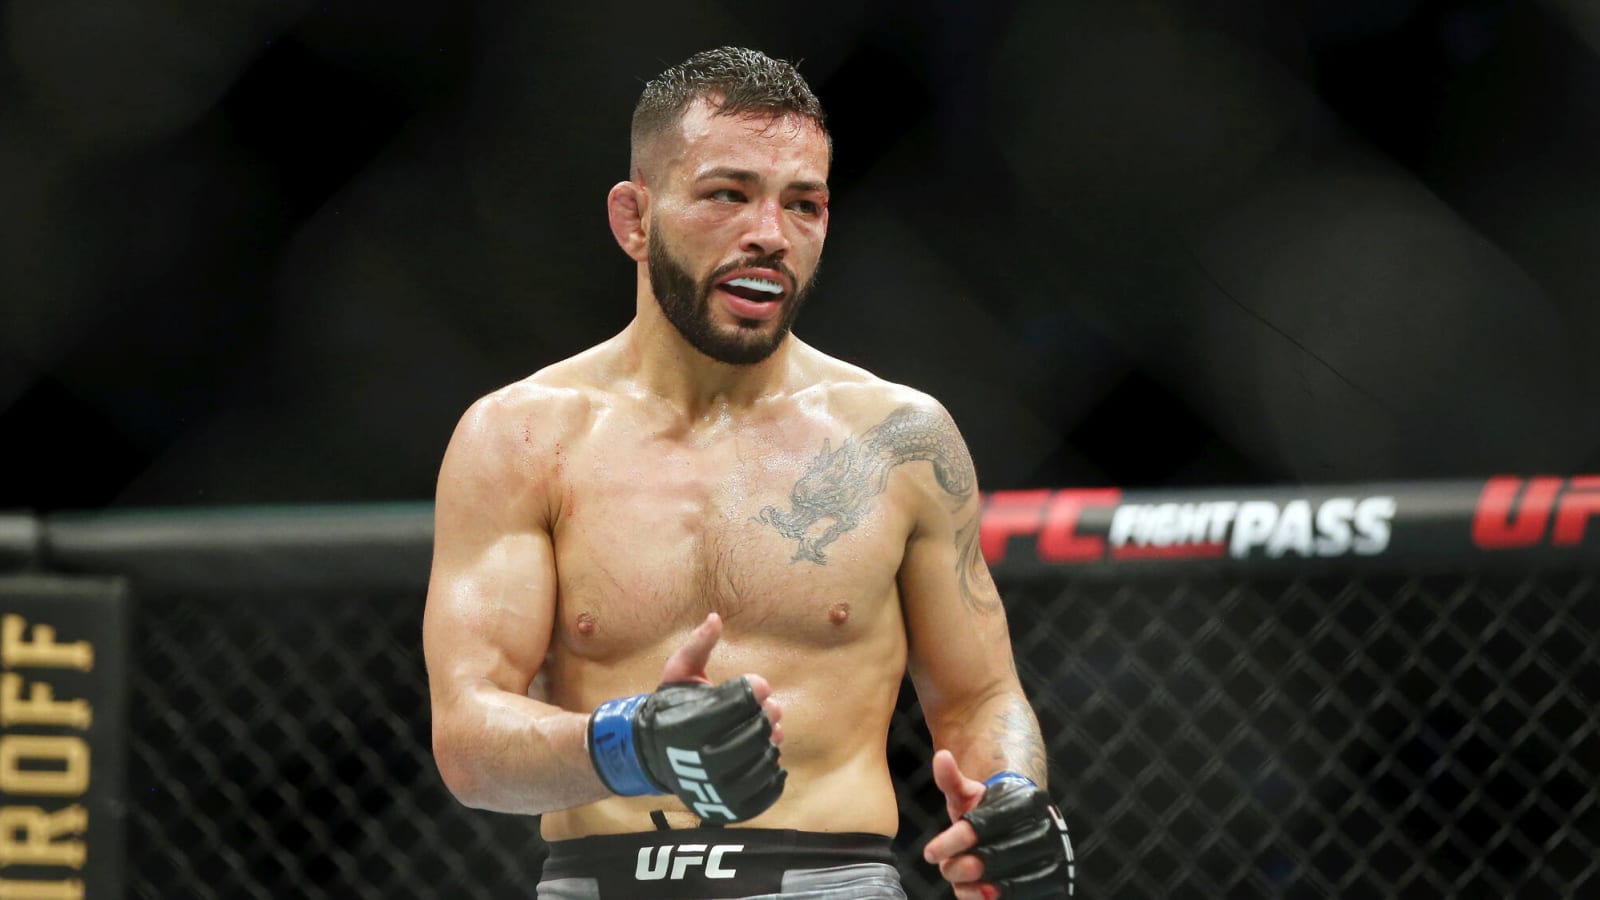 UFC featherweight asks Dana White to book his fight as he wants to replace mother’s stolen car